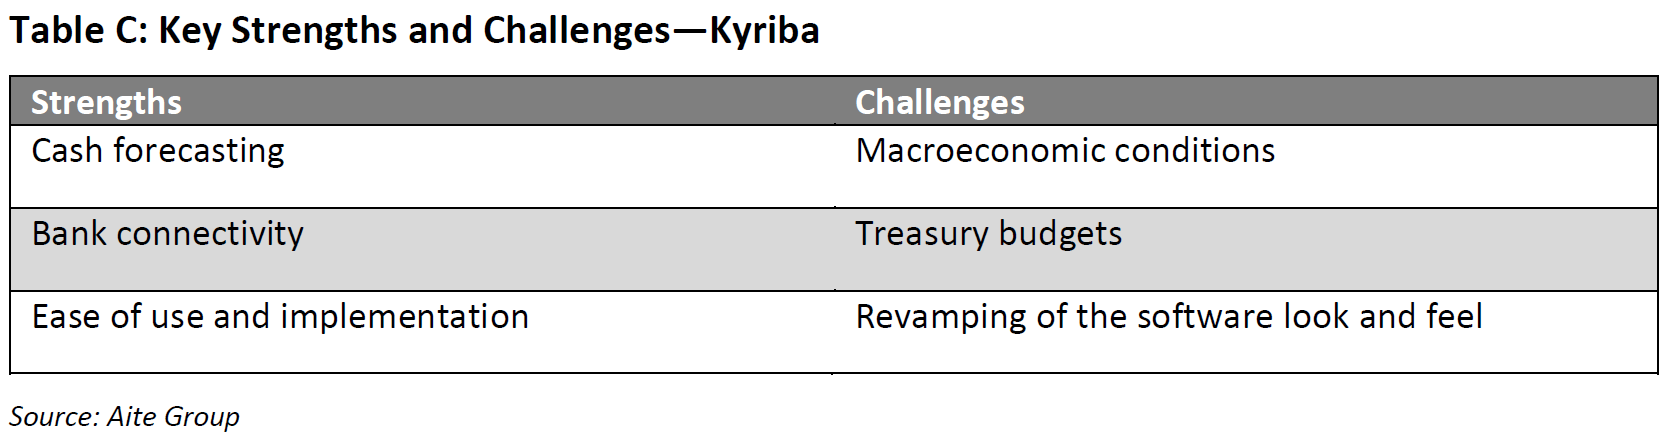 Aite Evaluation Report - Table C: Key Strengths and Challenges - Kyriba